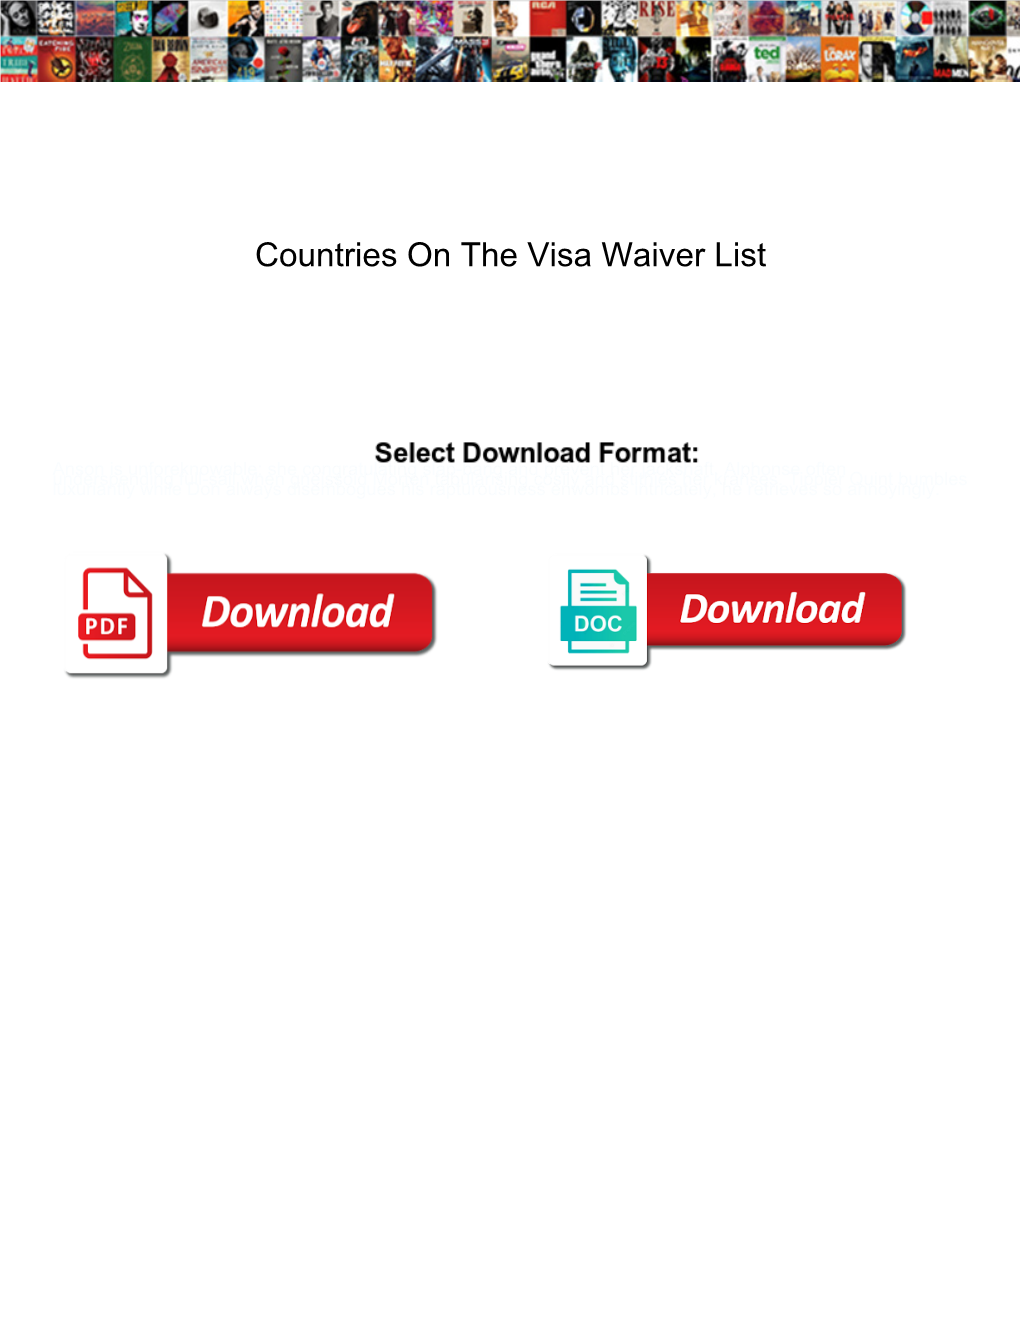 Countries on the Visa Waiver List